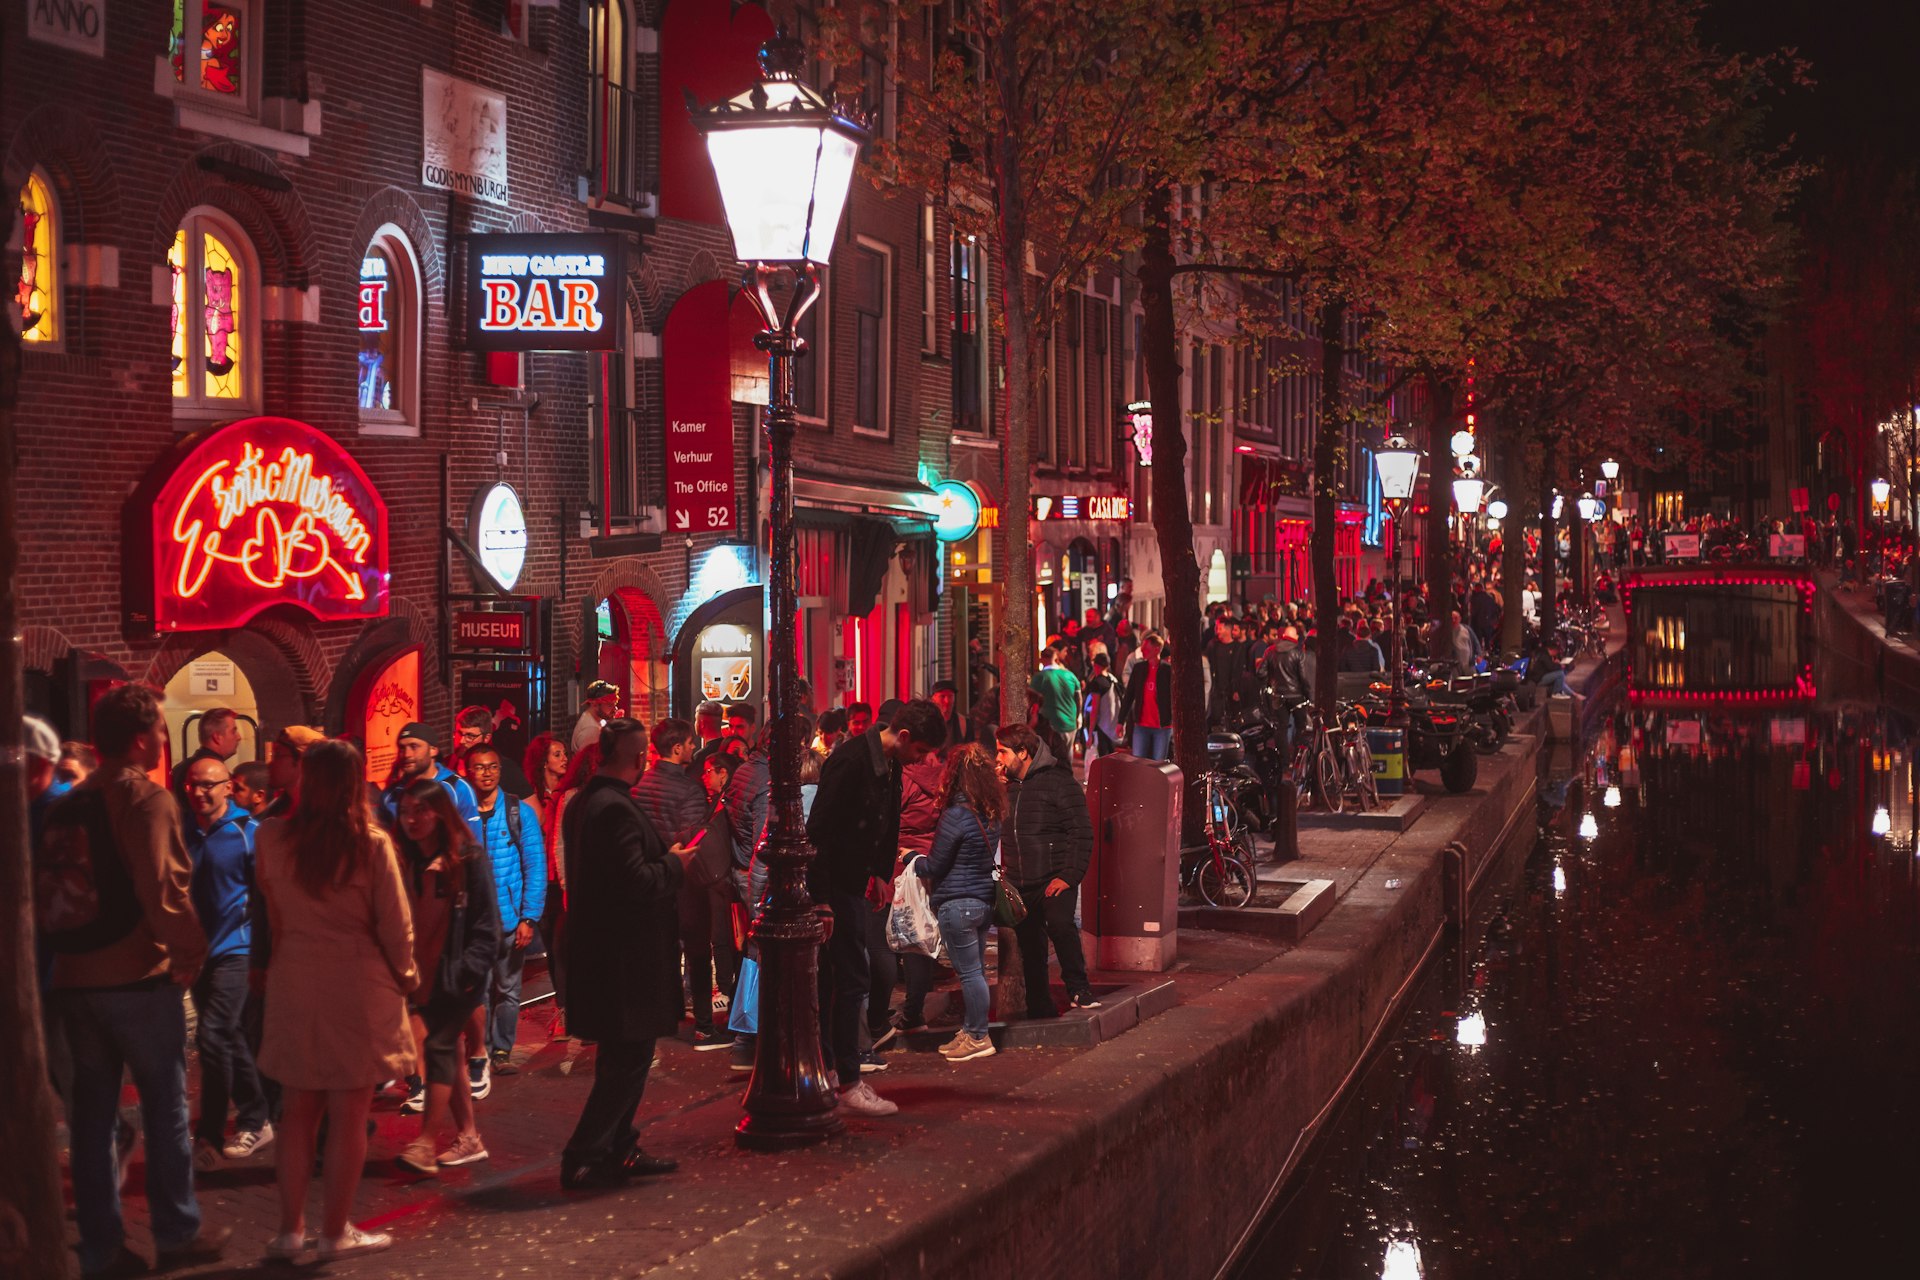 Crowds of tourists walk at night along the canal in the Red Light District, Amsterdam, Netherlands